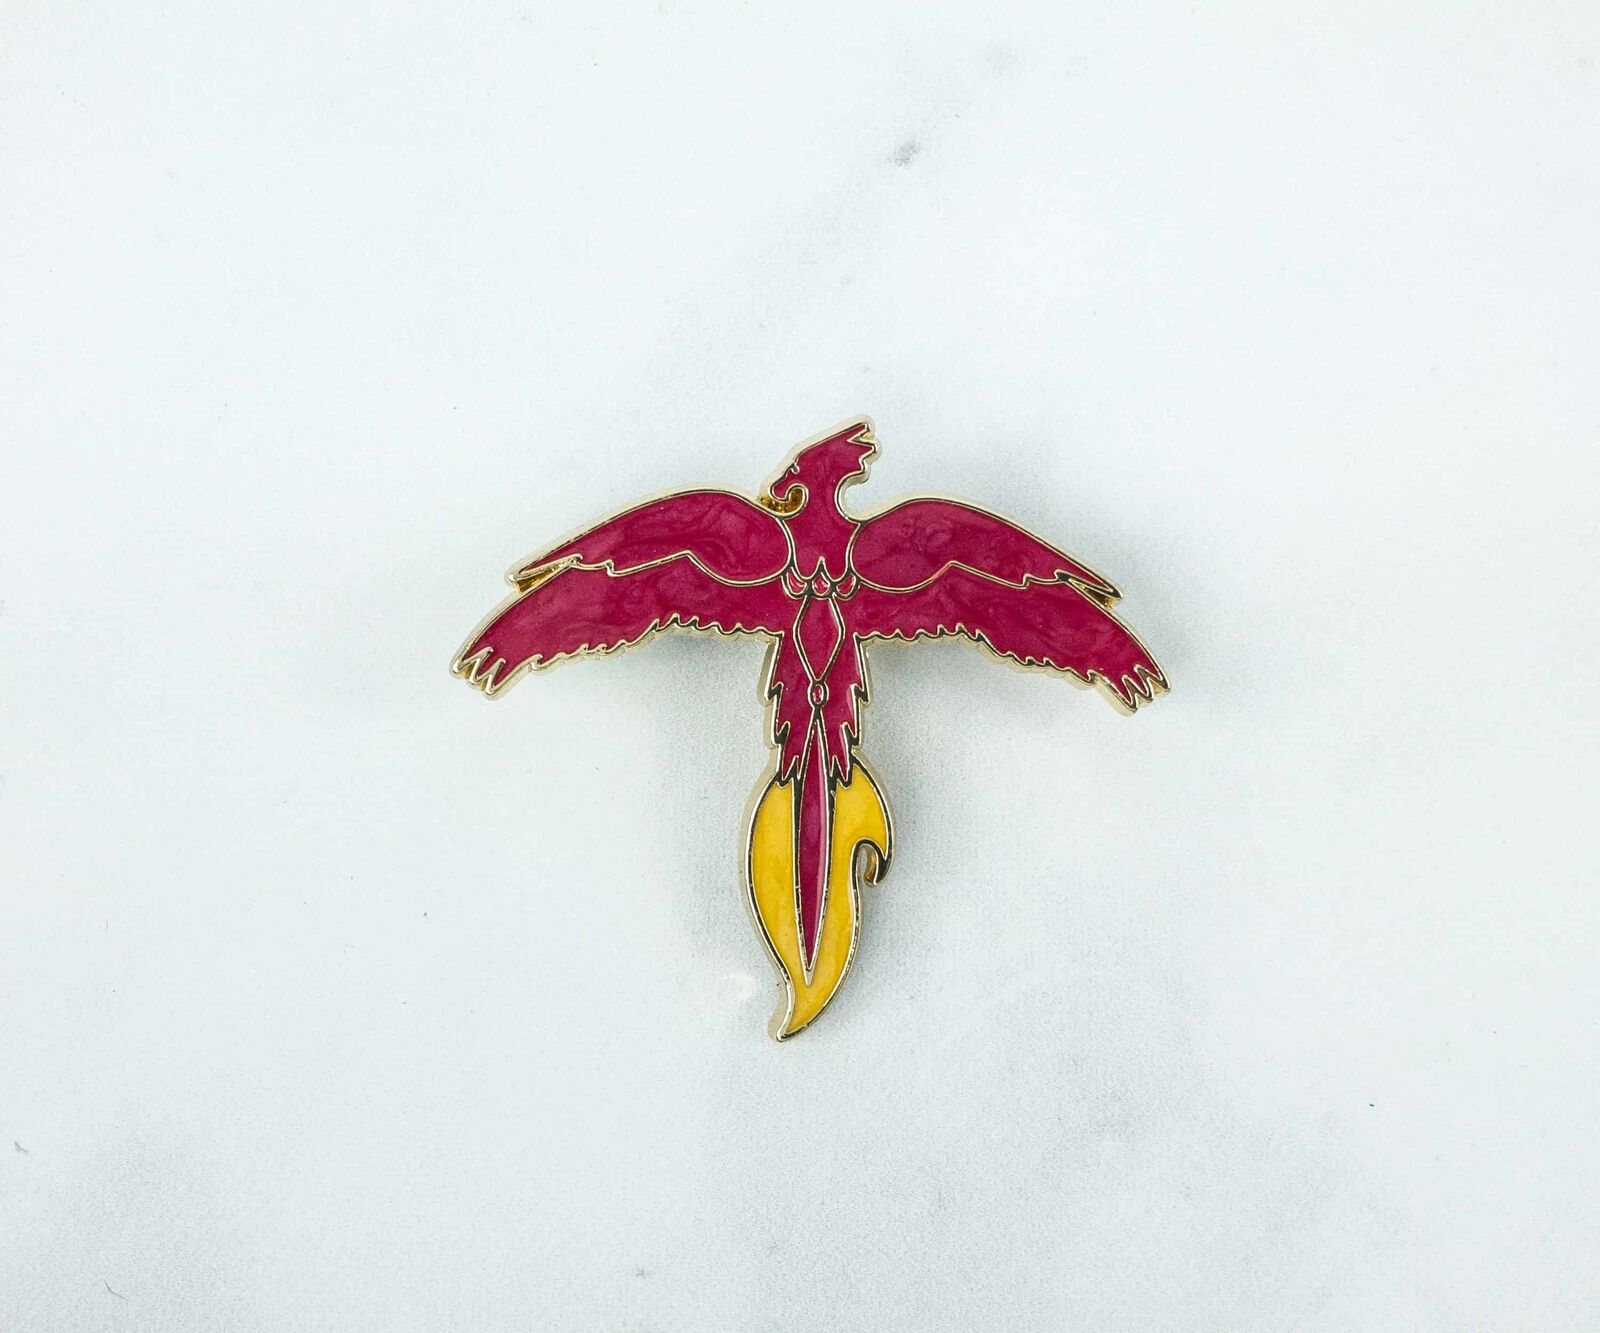 Wizarding World of Harry Potter - Fawkes the Phoenix Emblem Pin - Loot Crate